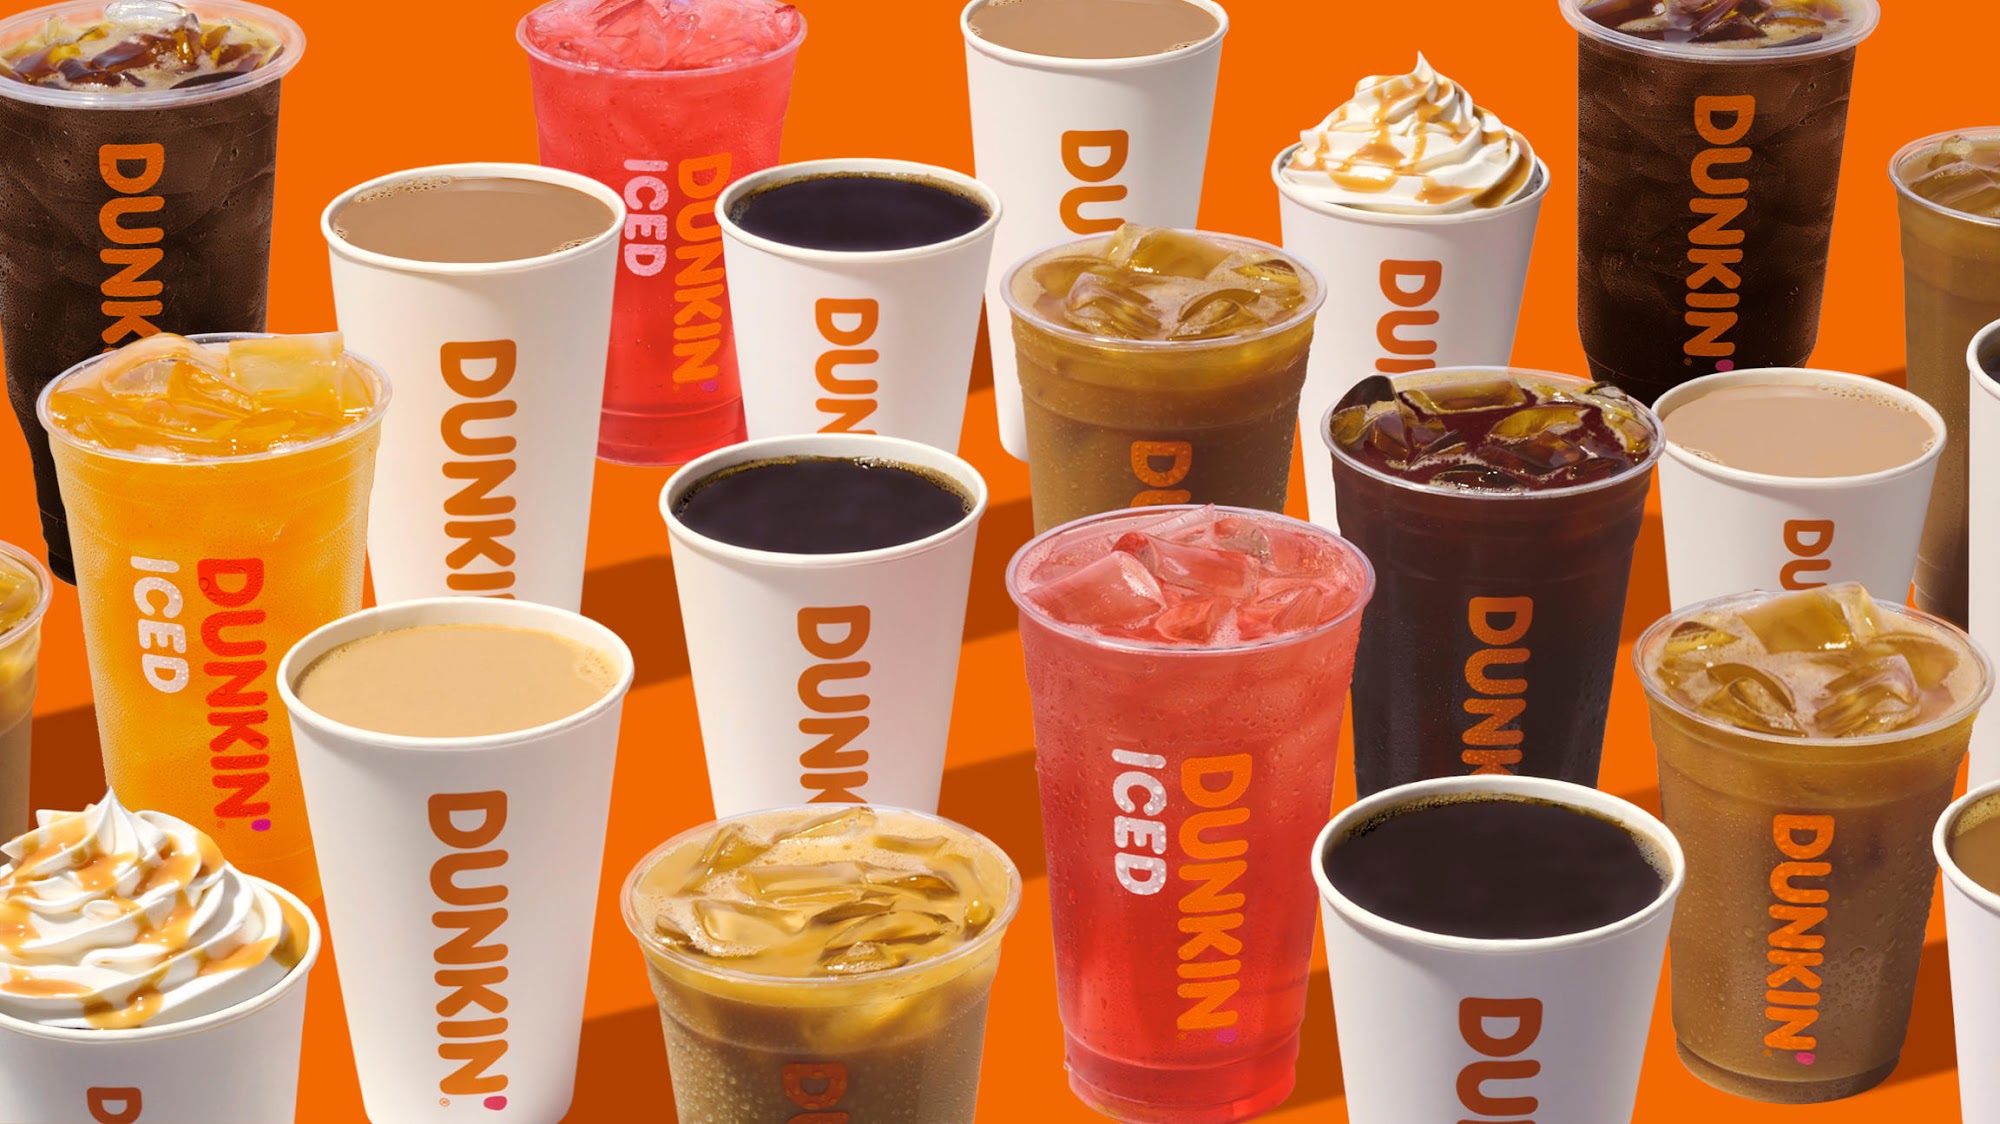 Dunkin' 108 Red Banks Rd, Greenville, NC 27858